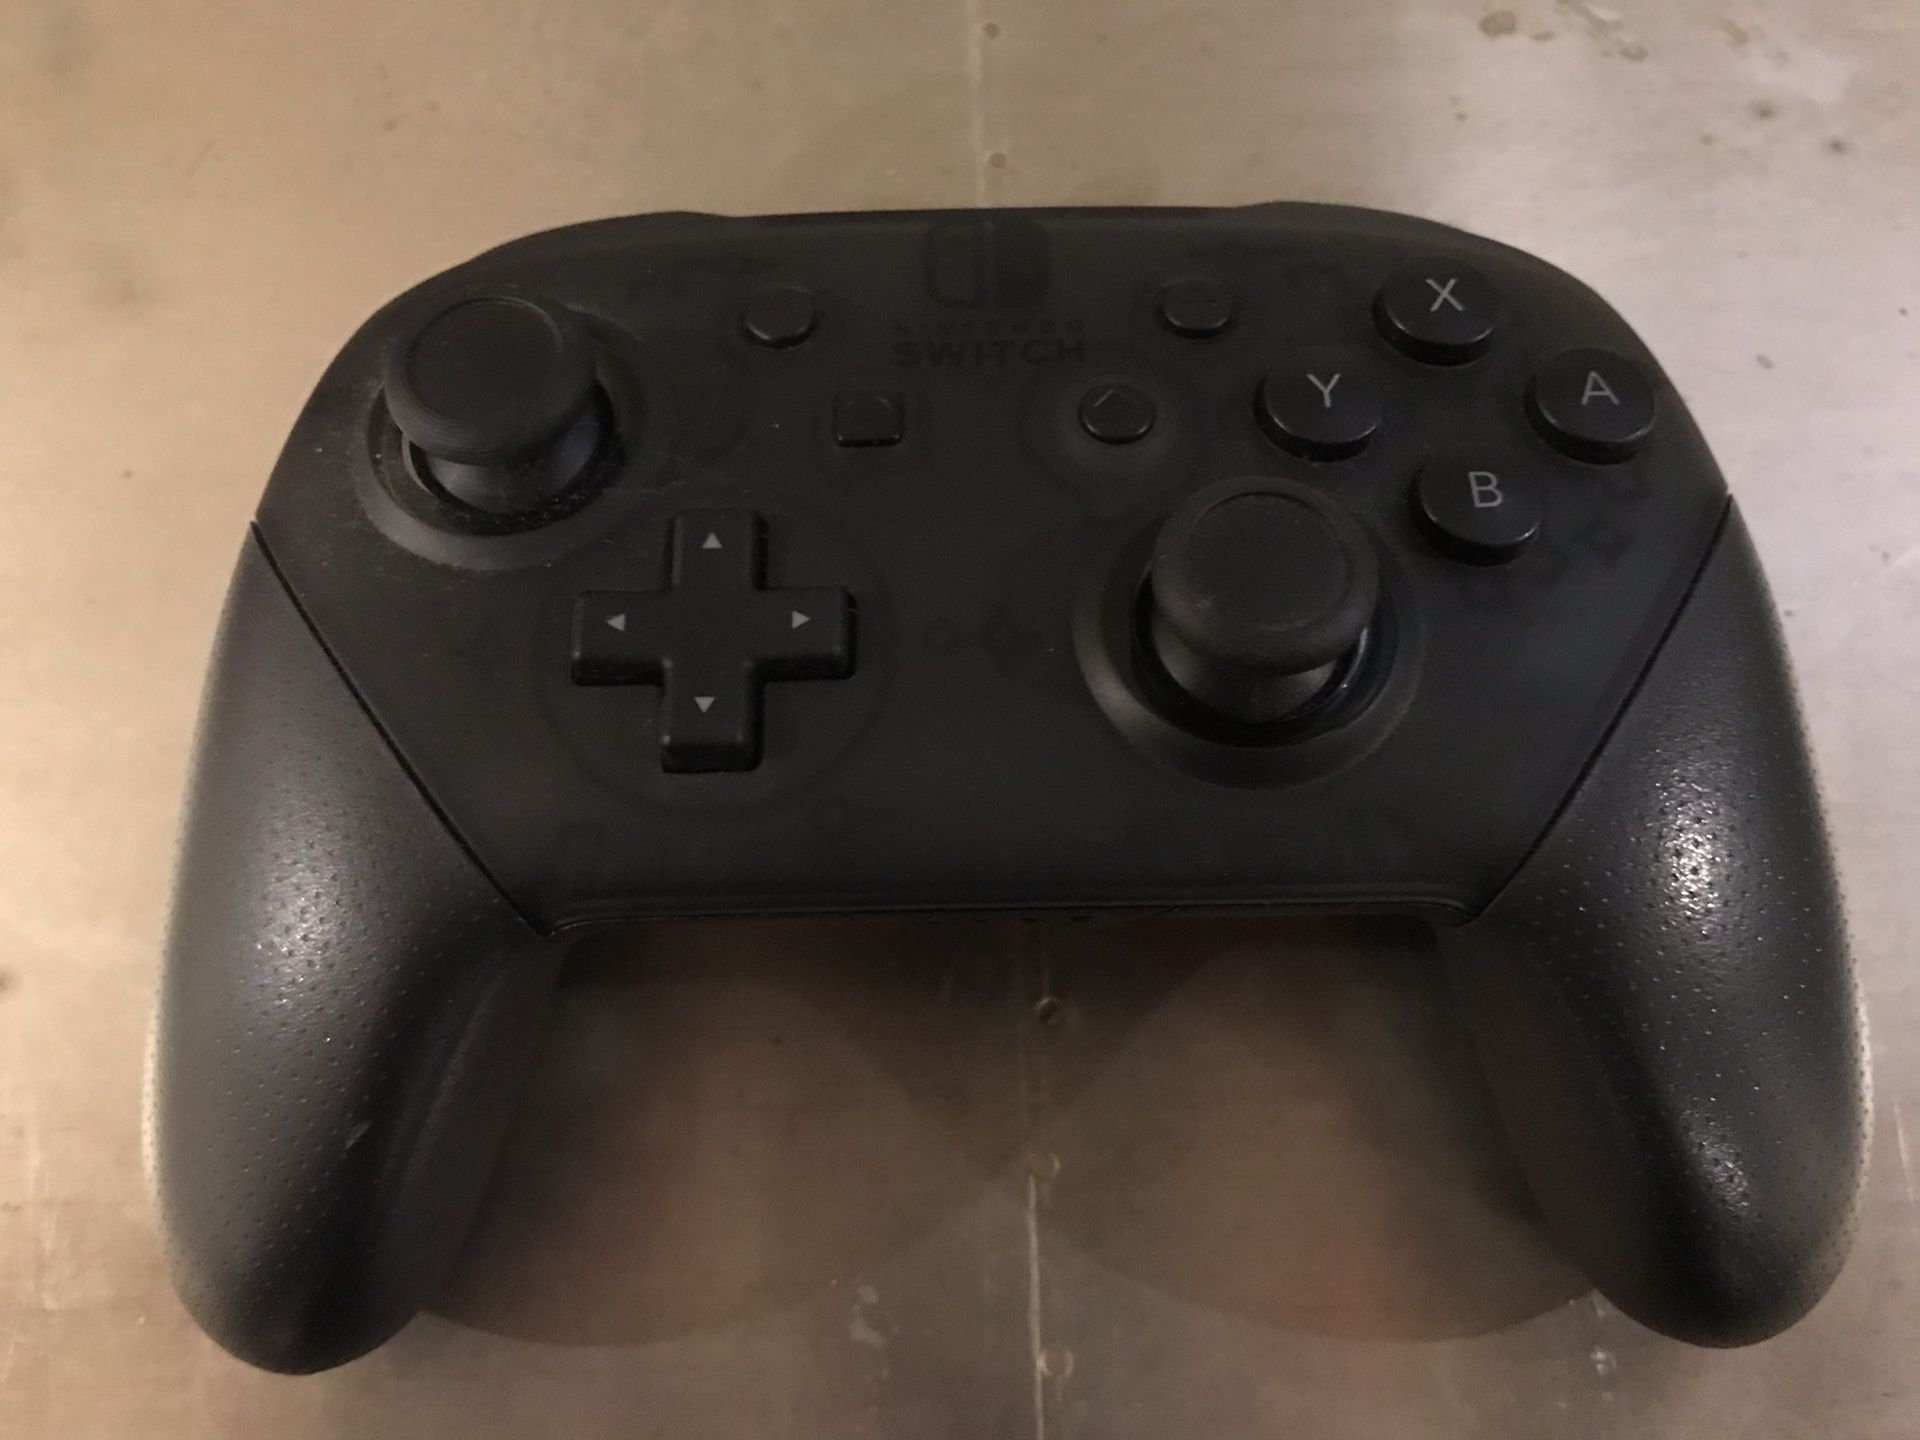 Nintendo Switch Pro Controller with cable and packaging